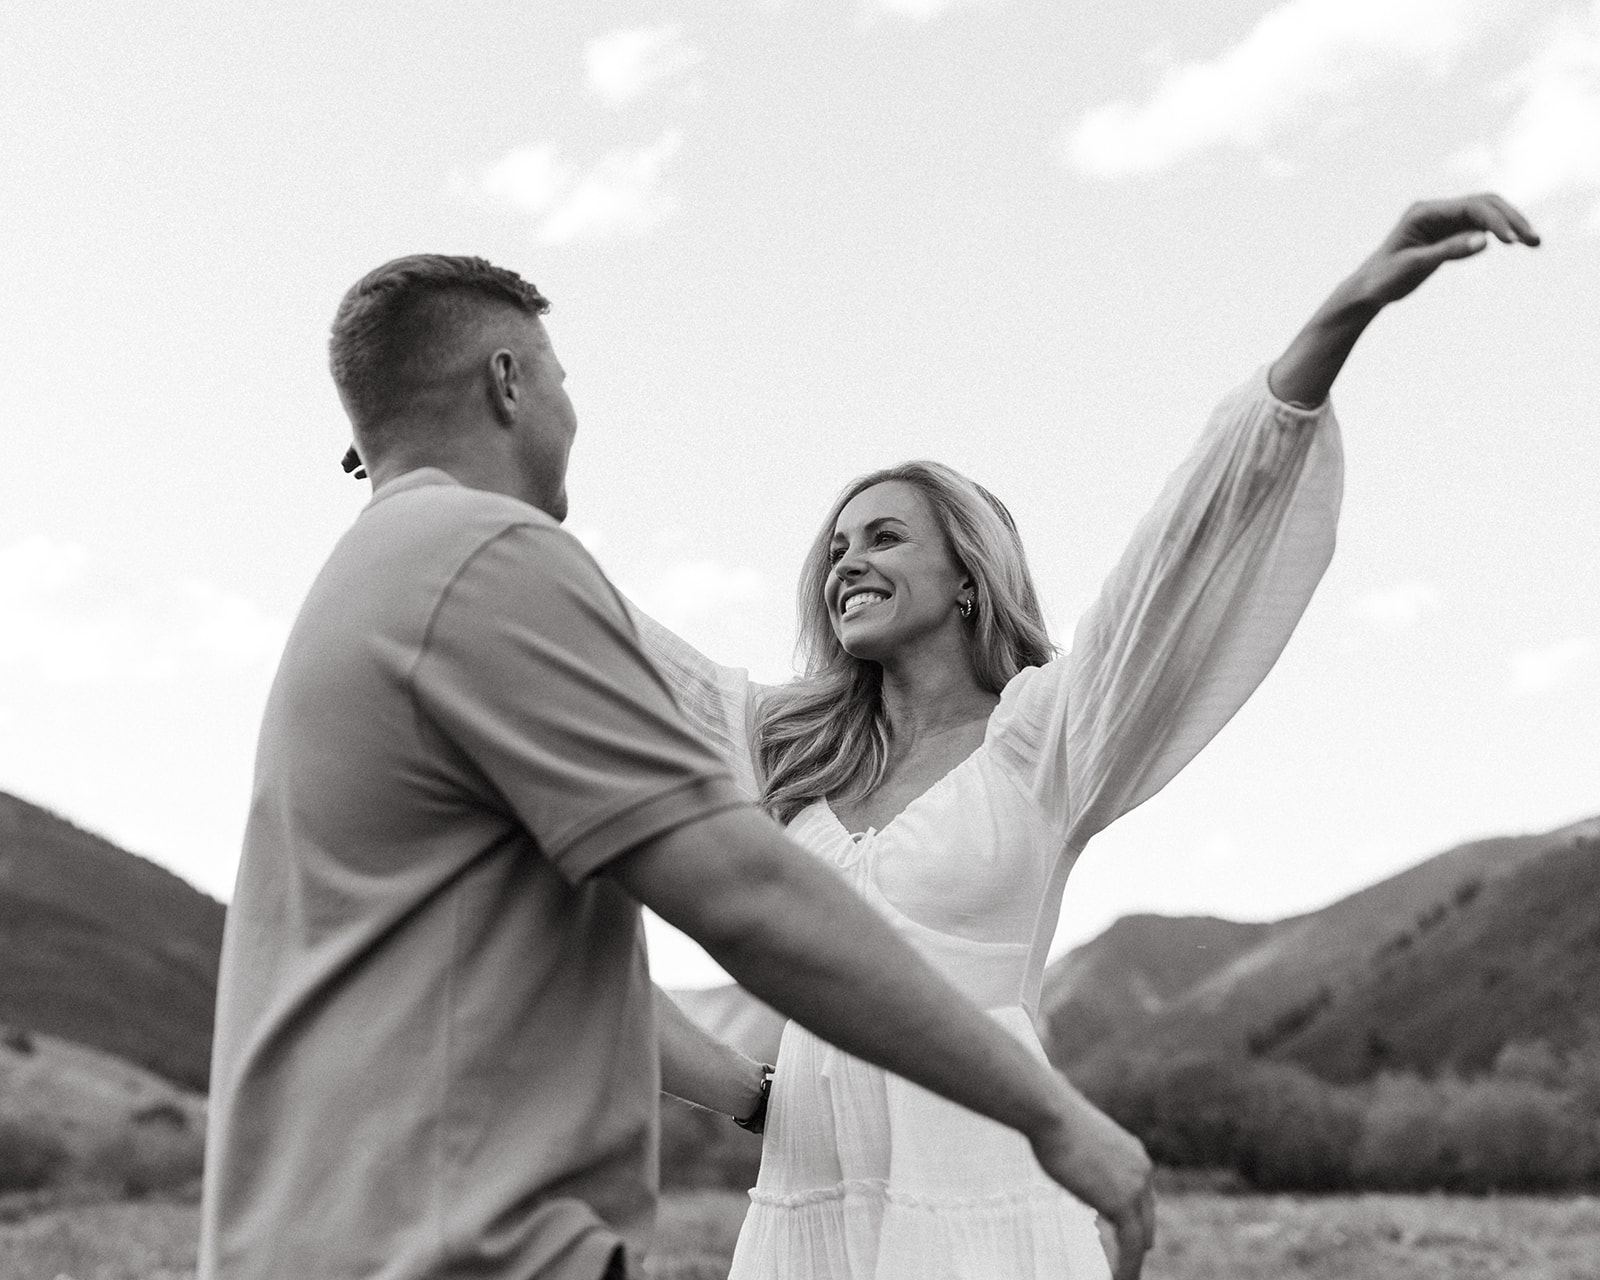 An engaged couple goes in for a hug during their mountain engagement session in the Colorado Rockies near Aspen.